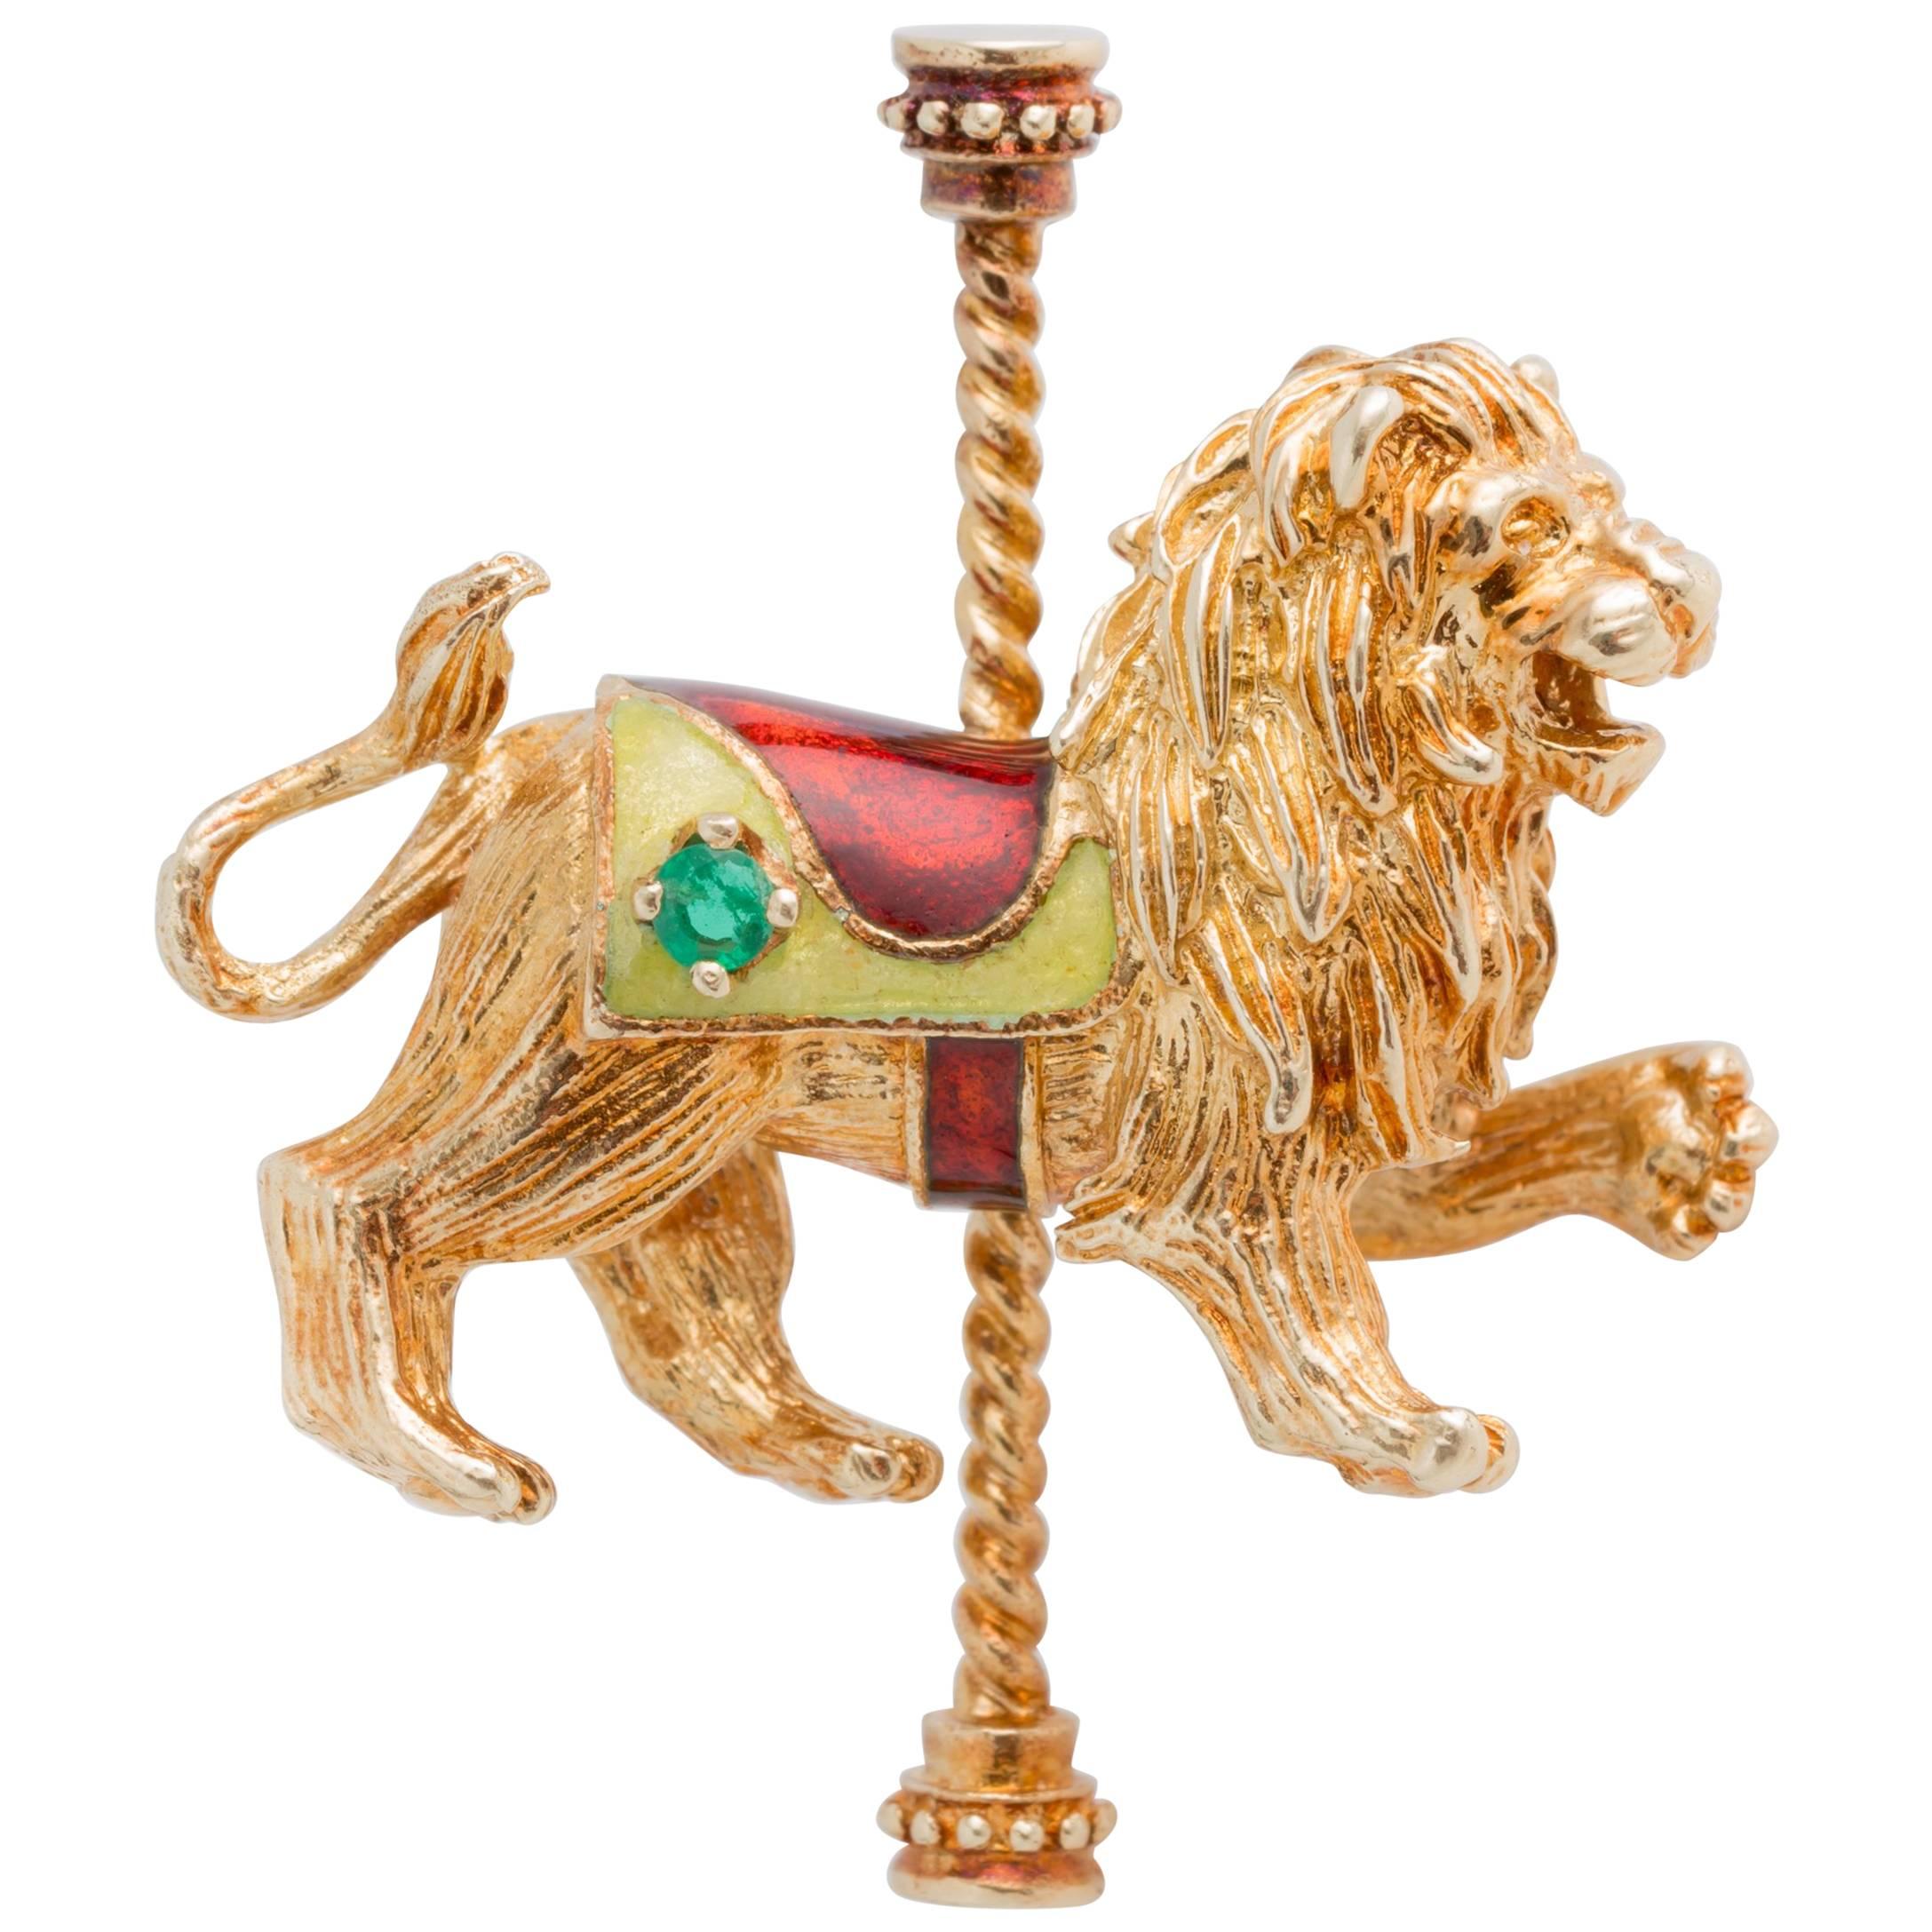 1970s Carousel Lion Pin Brooch in 14 Karat Yellow Gold, Emerald and Enamel